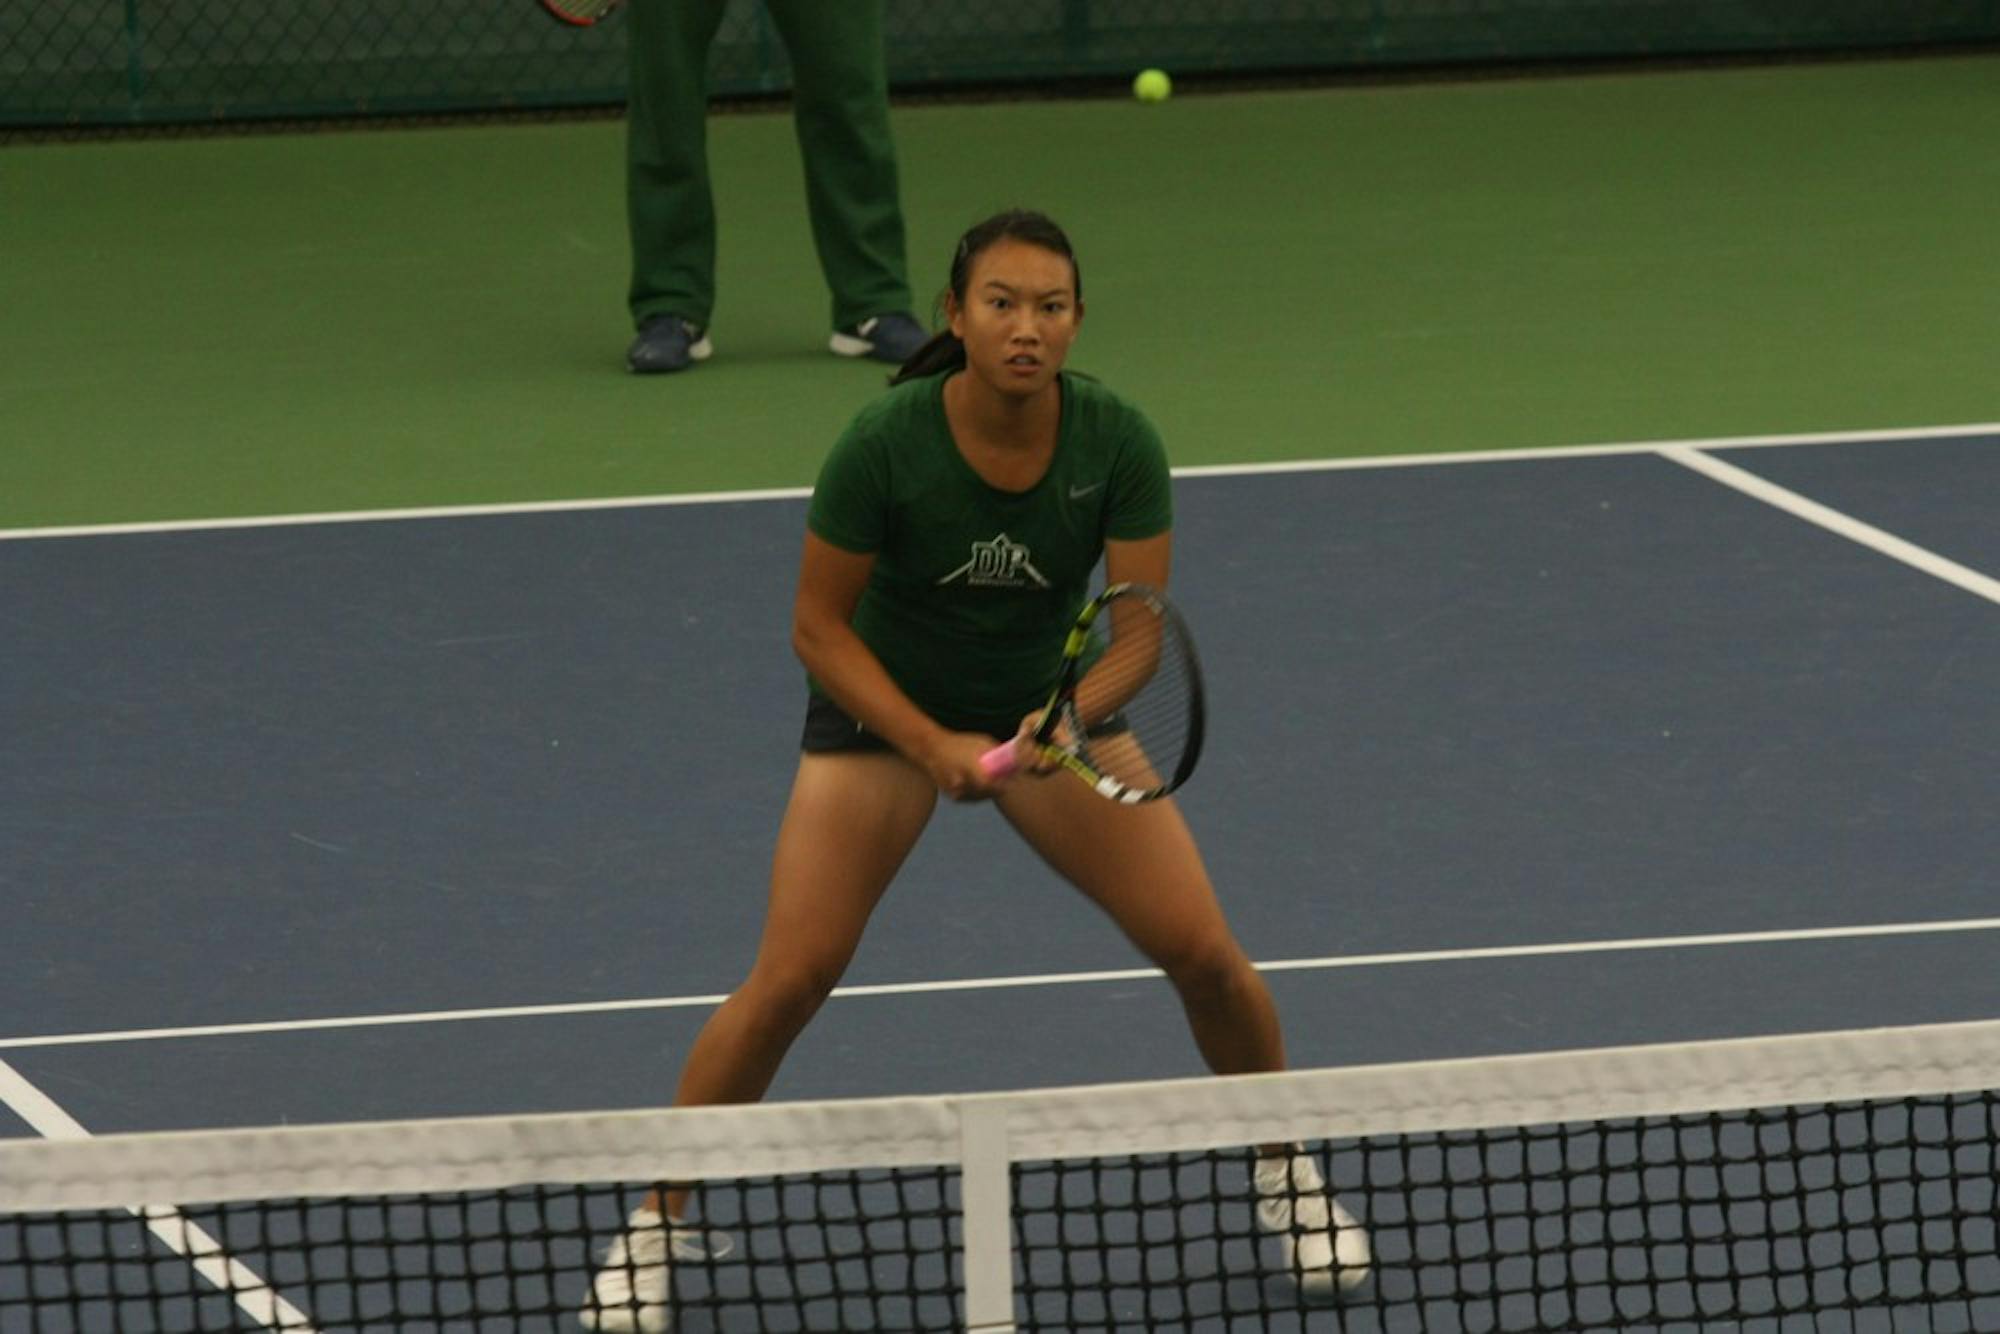 Chuyang Guan ’20 opted to play for Dartmouth instead of turning pro.